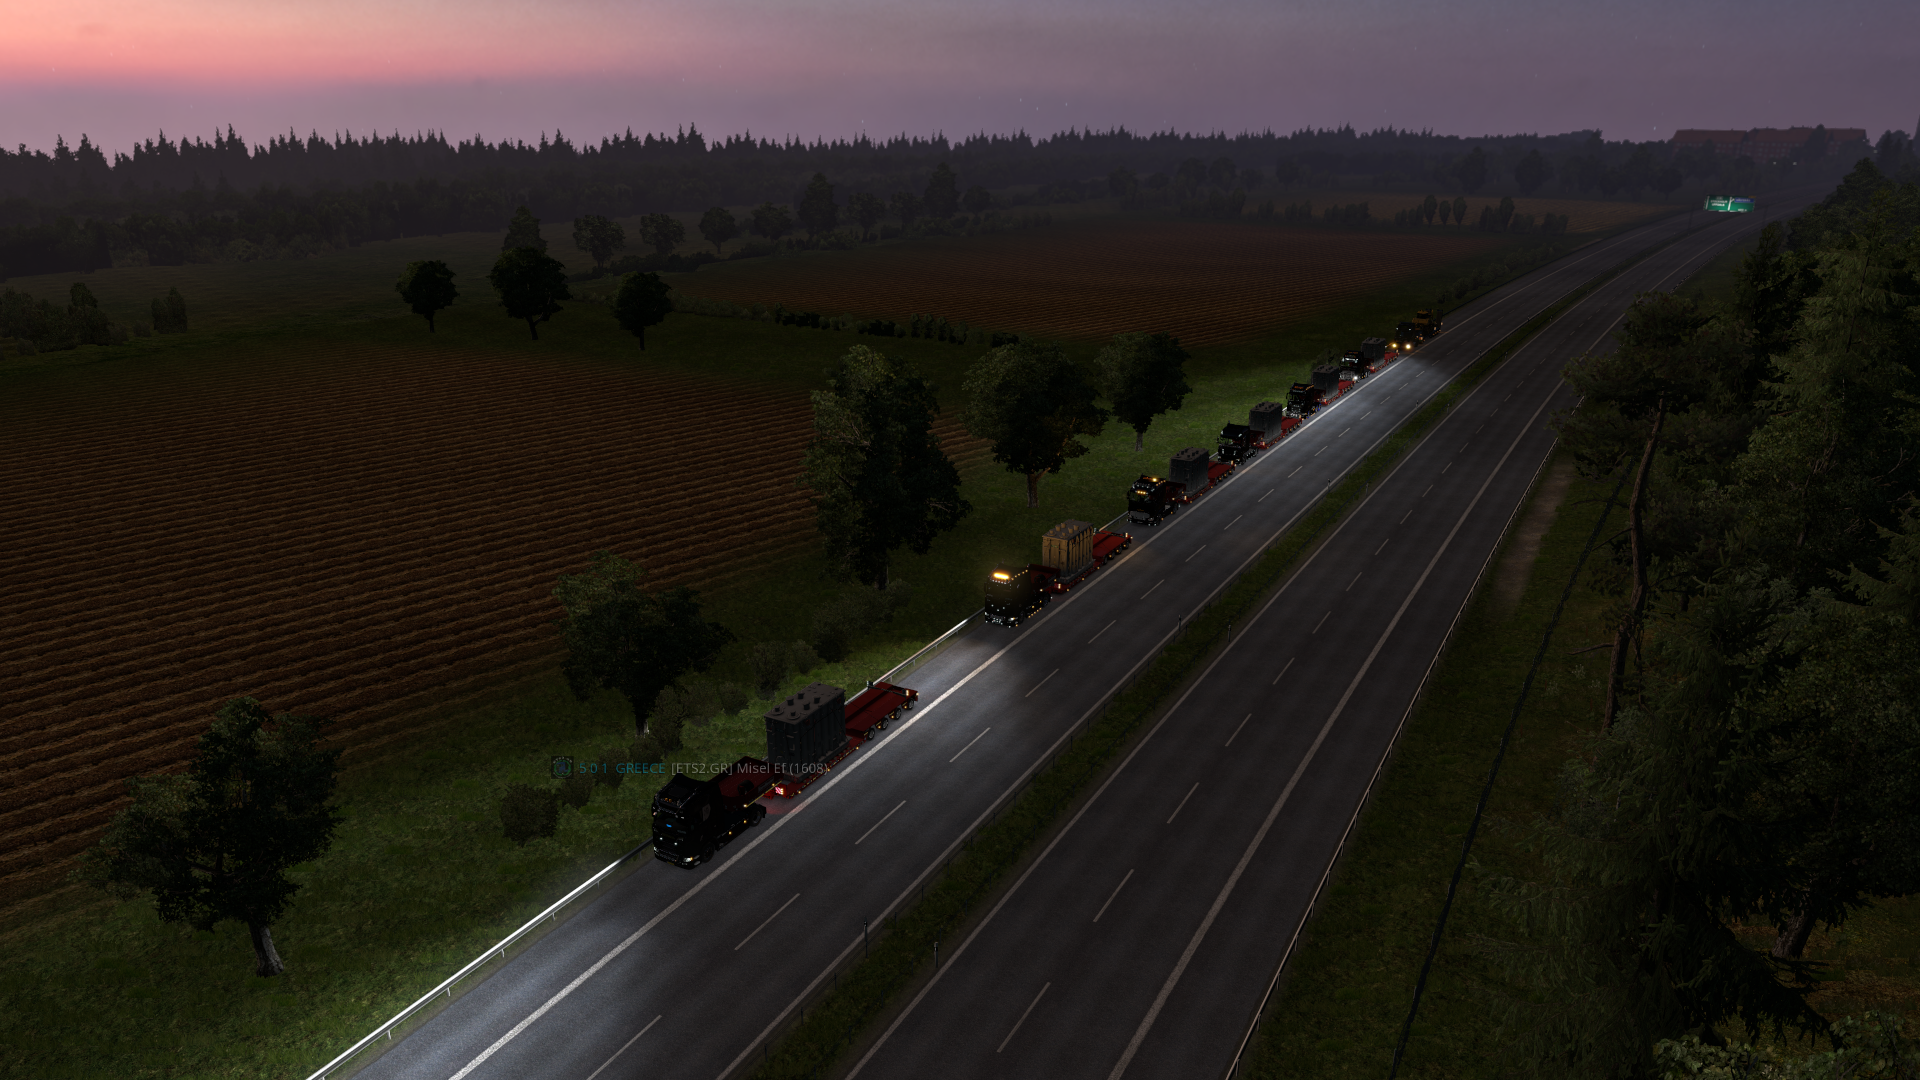 ets2_20200324_215339_00.png